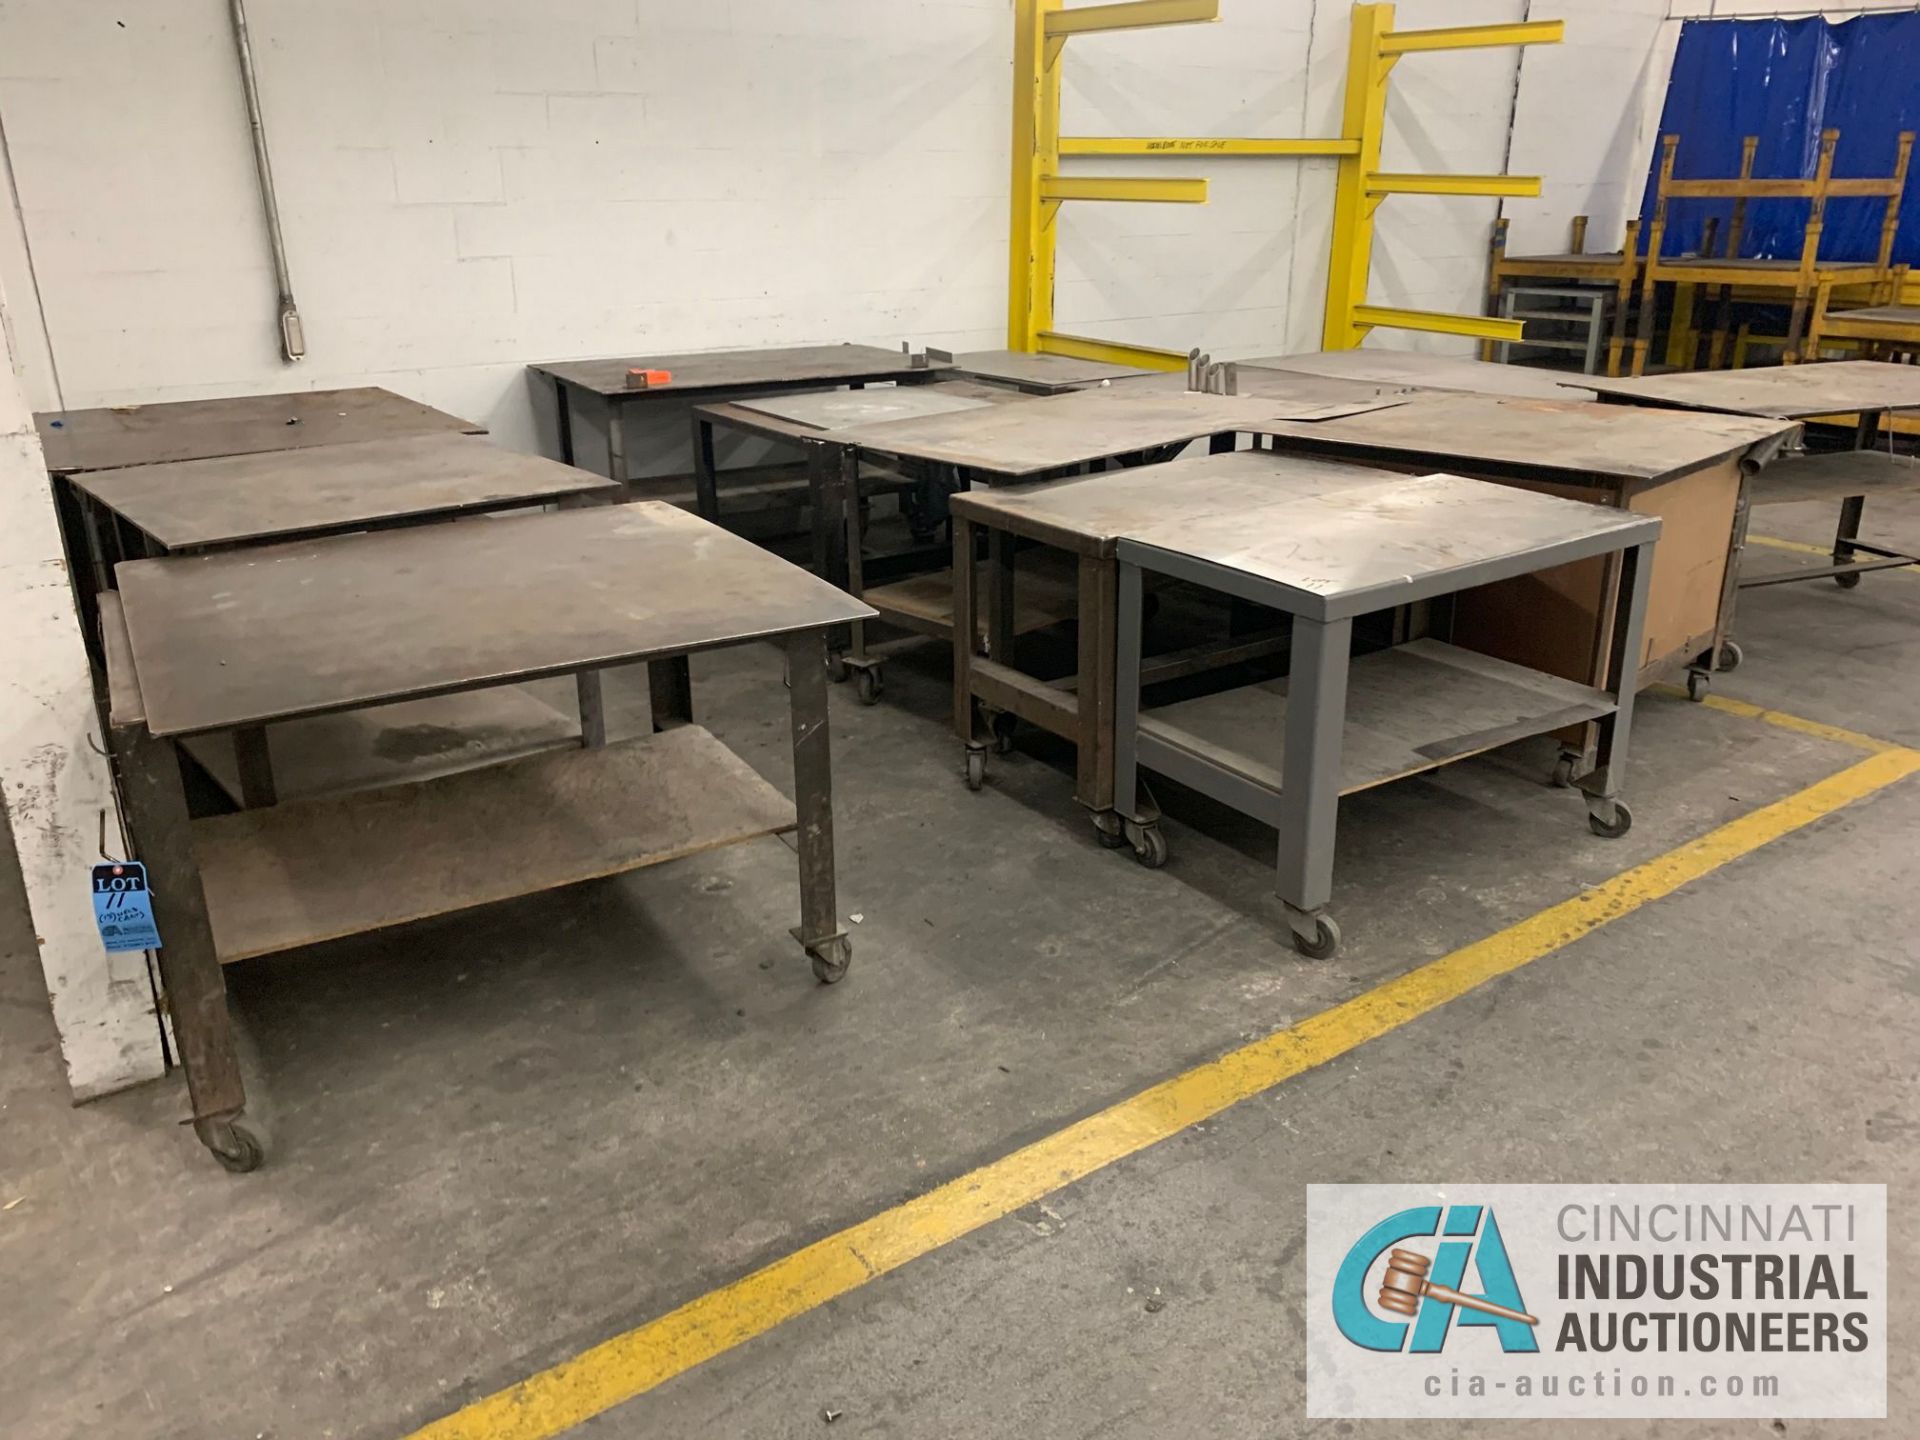 VARIOUS HEAVY DUTY CARTS, SOME SET-UP TO BE HEAVY WELD TABLES